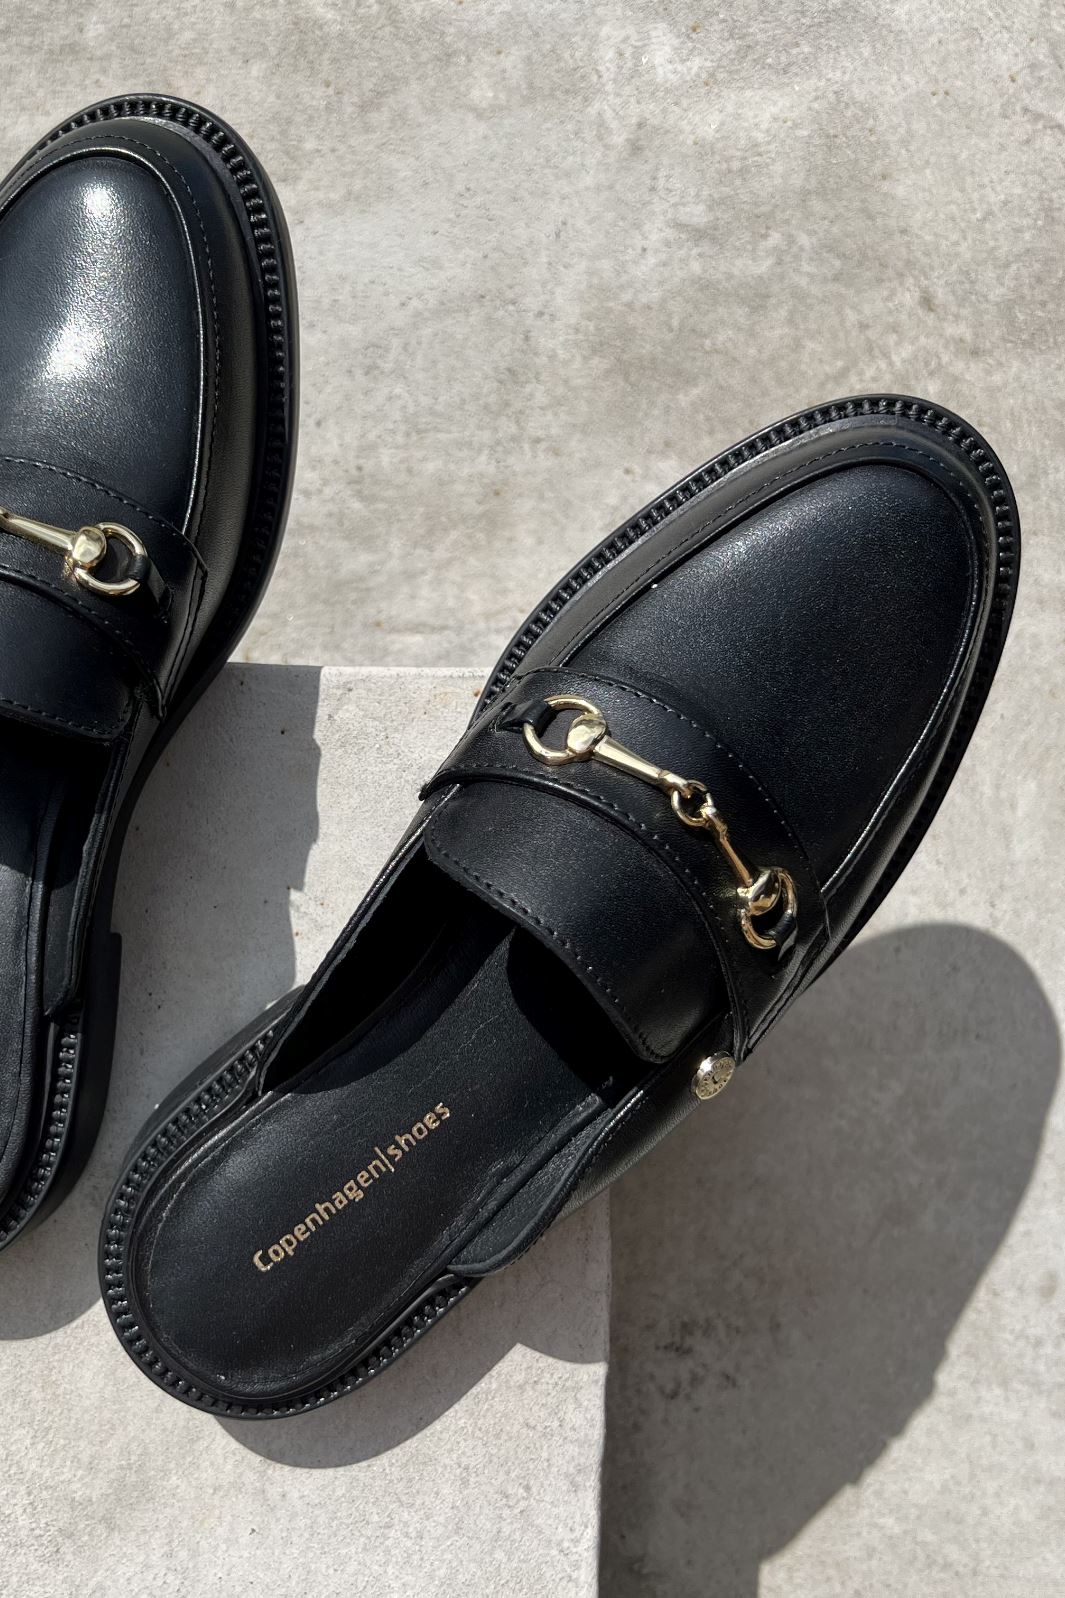 Copenhagen Shoes - My Vibes - 001 Black Loafers 